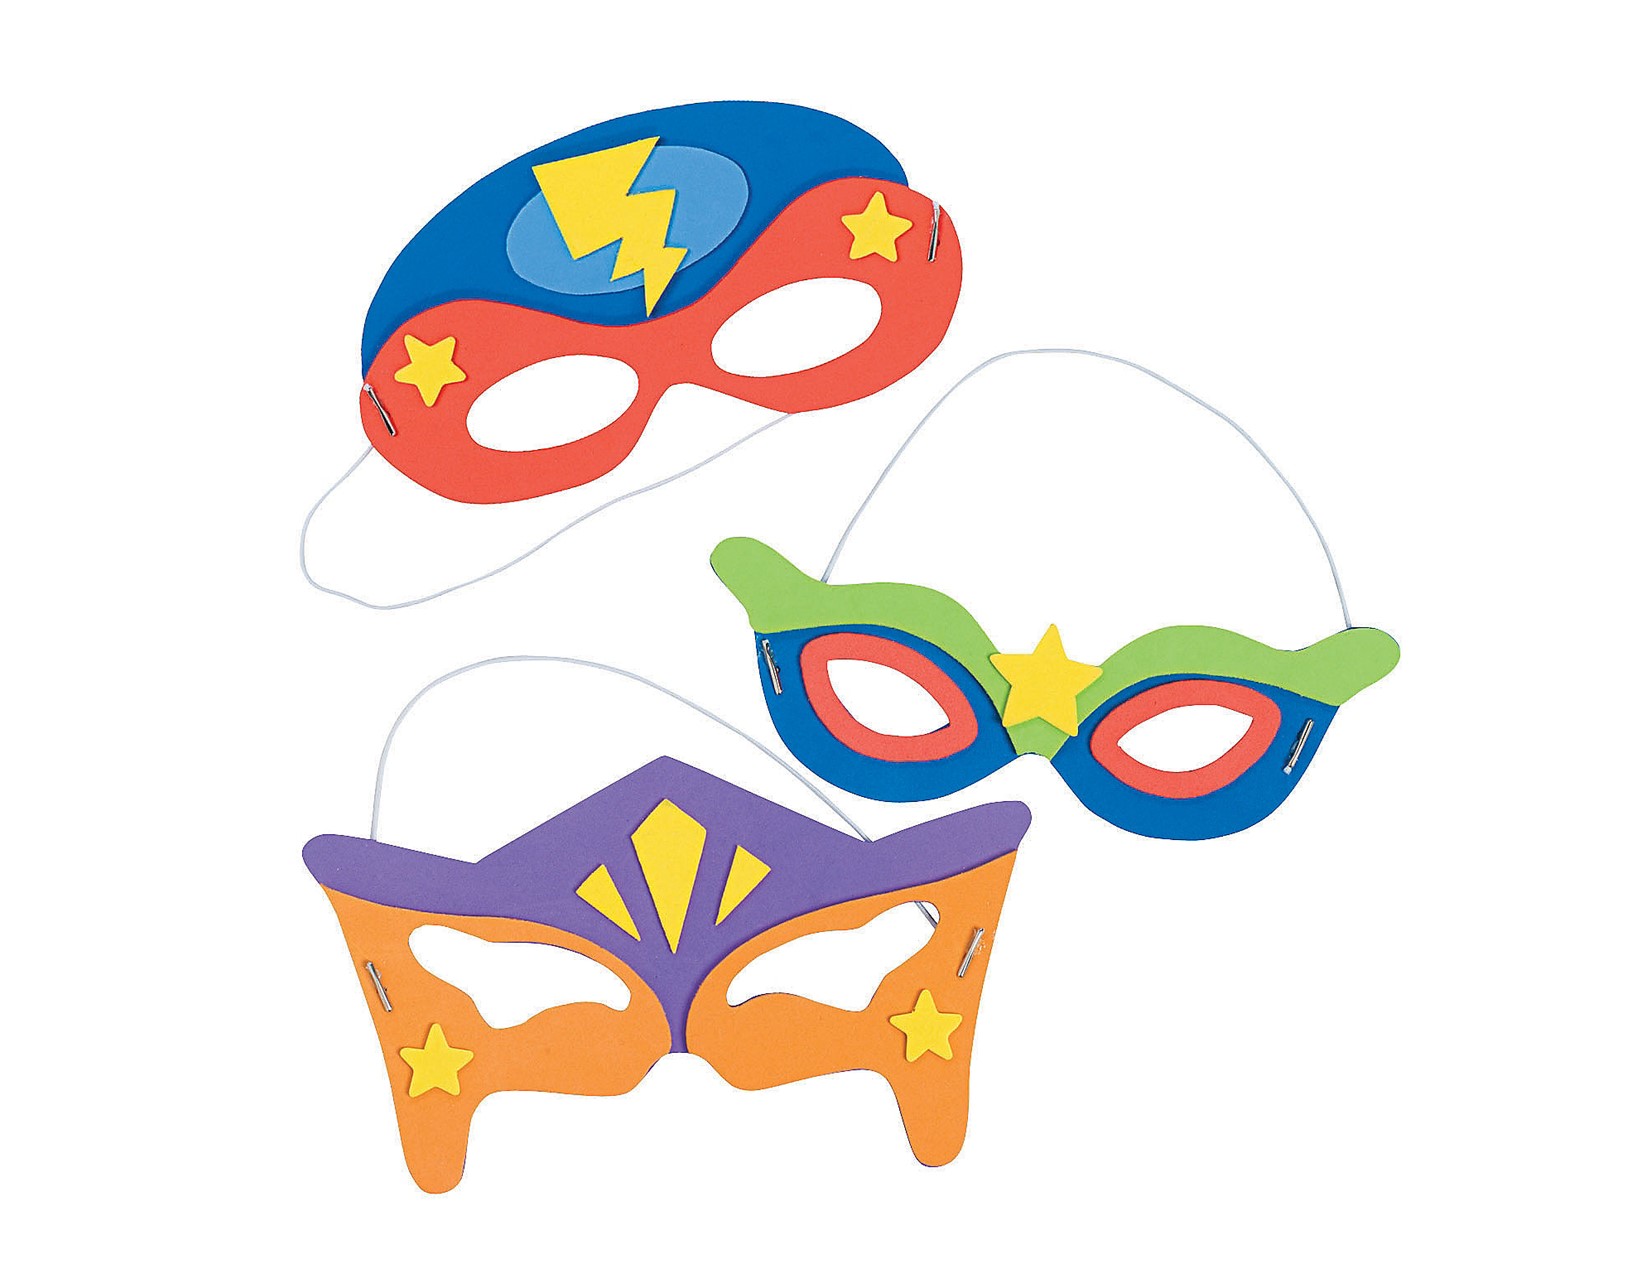 three superhero masks in primary colors of blue, red, orange, purple and green. One mask has a yellow lightening bolt, one mask has a yellow star, one mask has two stars and three triangles